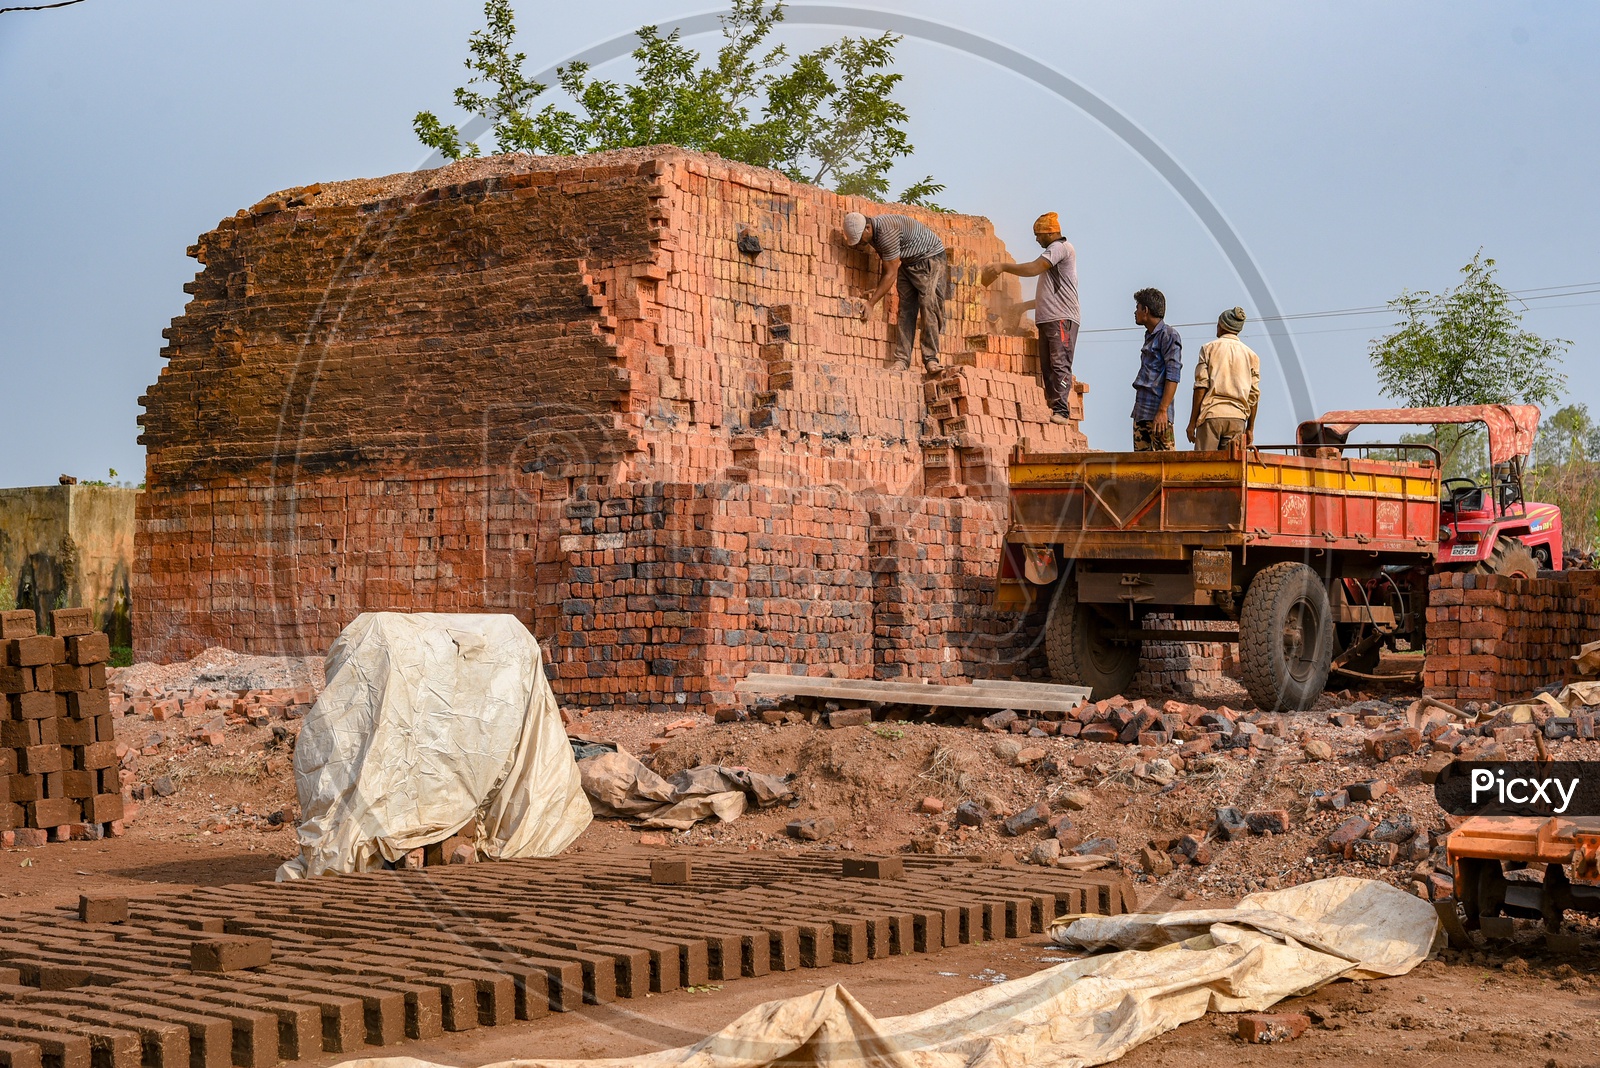 Workers loading Bricks to tractor